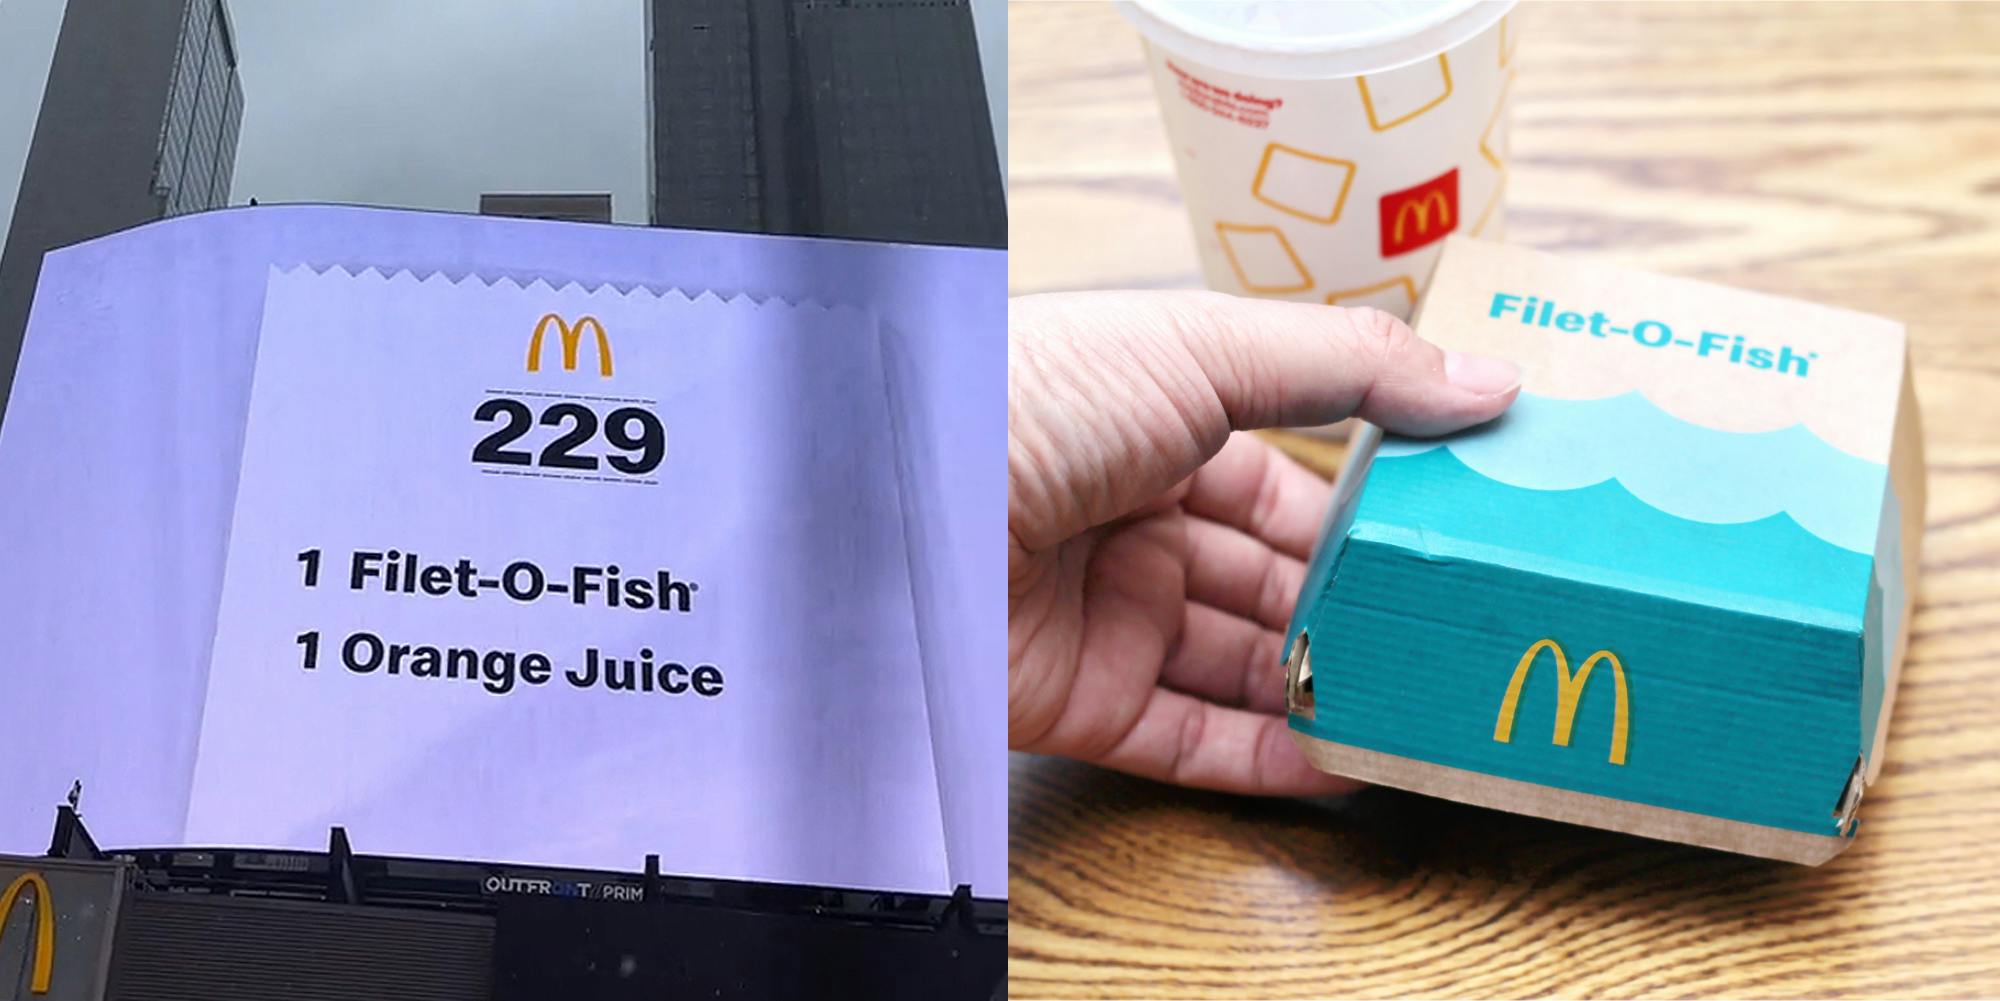 McDonald's order displayed on large outdoor screen "1 Filet-O-Fish 1 Orange Juice" (l) hand holding McDonald's Filet-O-Fish with drink next to it on wooden surface (r)